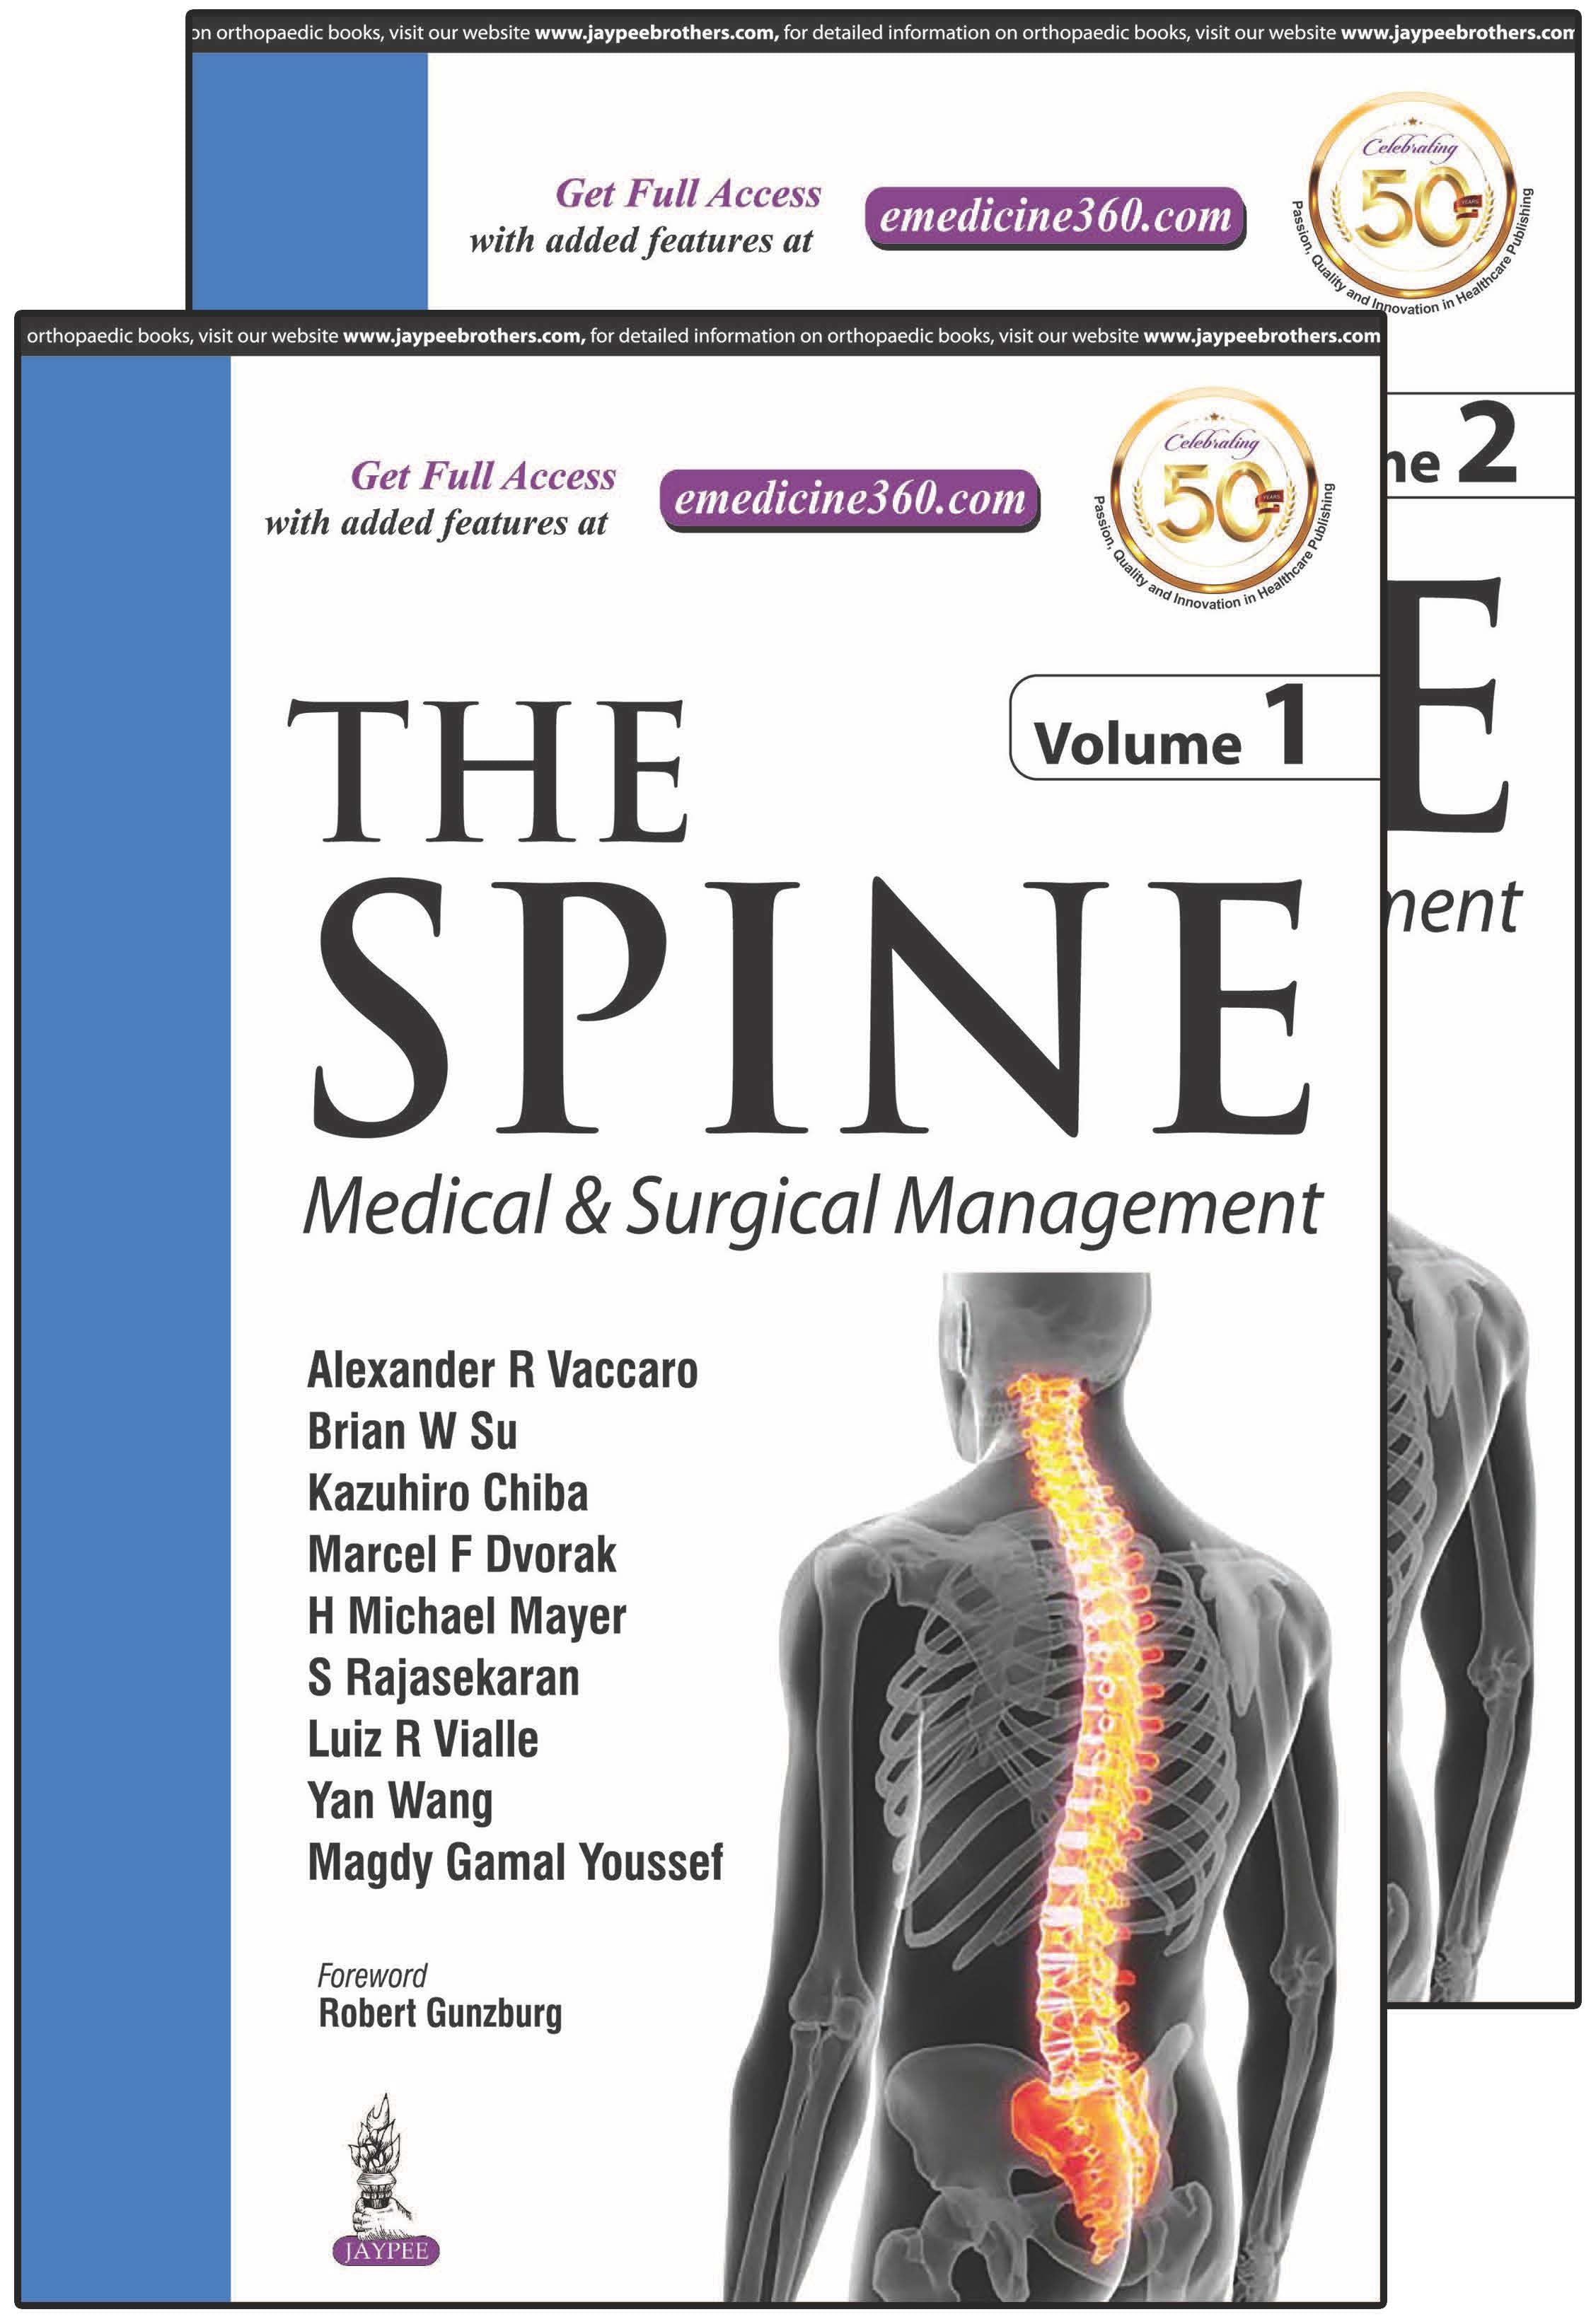 THE SPINE MEDICAL AND SURGICAL MANAGEMENT (2VOLS),1/E,ALEXANDER R VACCARO